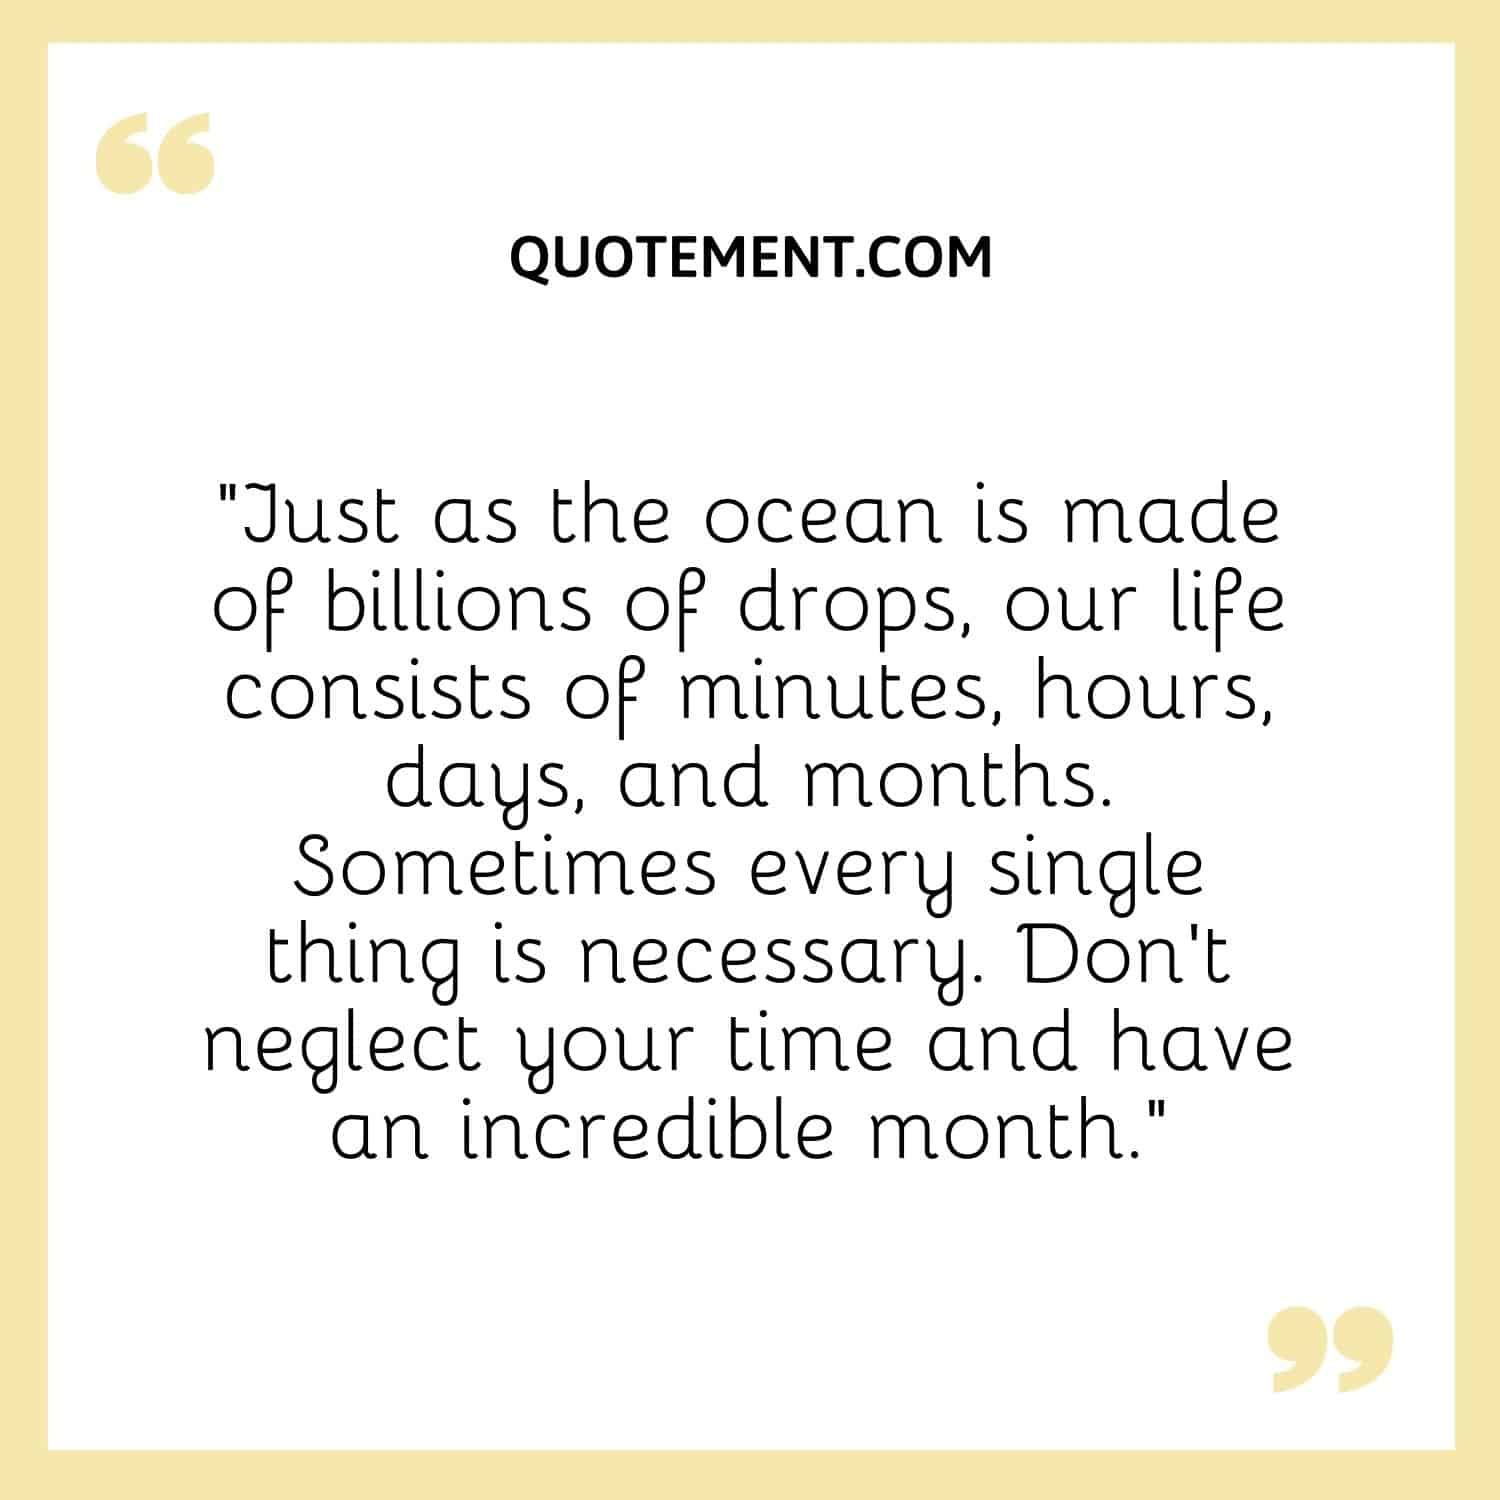 Don’t neglect your time and have an incredible month